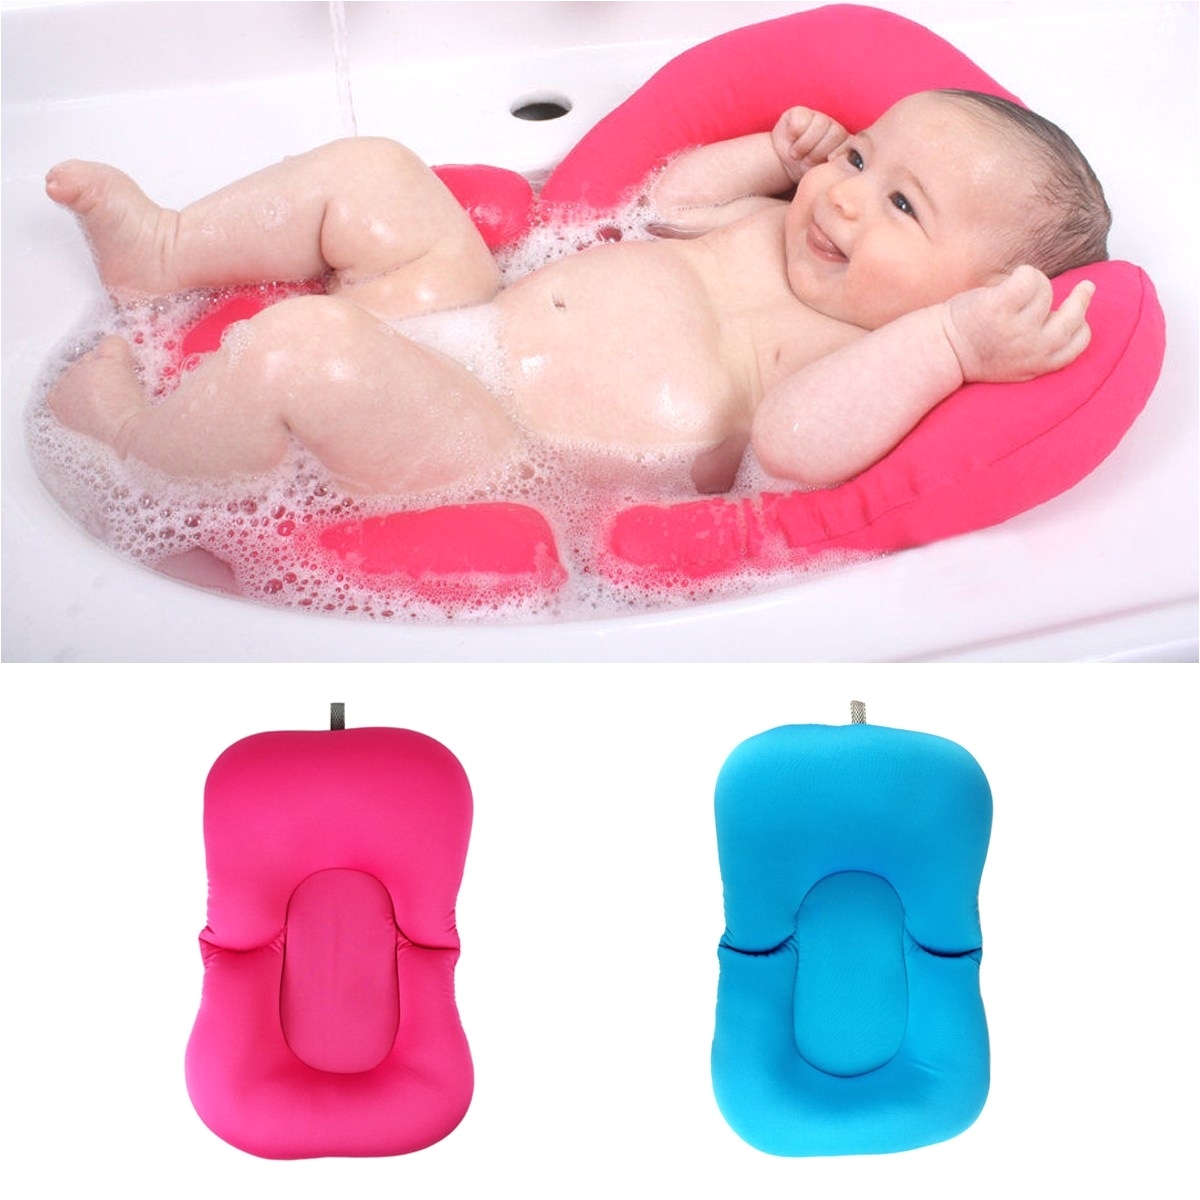 hot sales newborn baby bath tub pillow pad infant lounger air cushion floating soft seat bathtub support for kids childern in baby tubs from mother kids